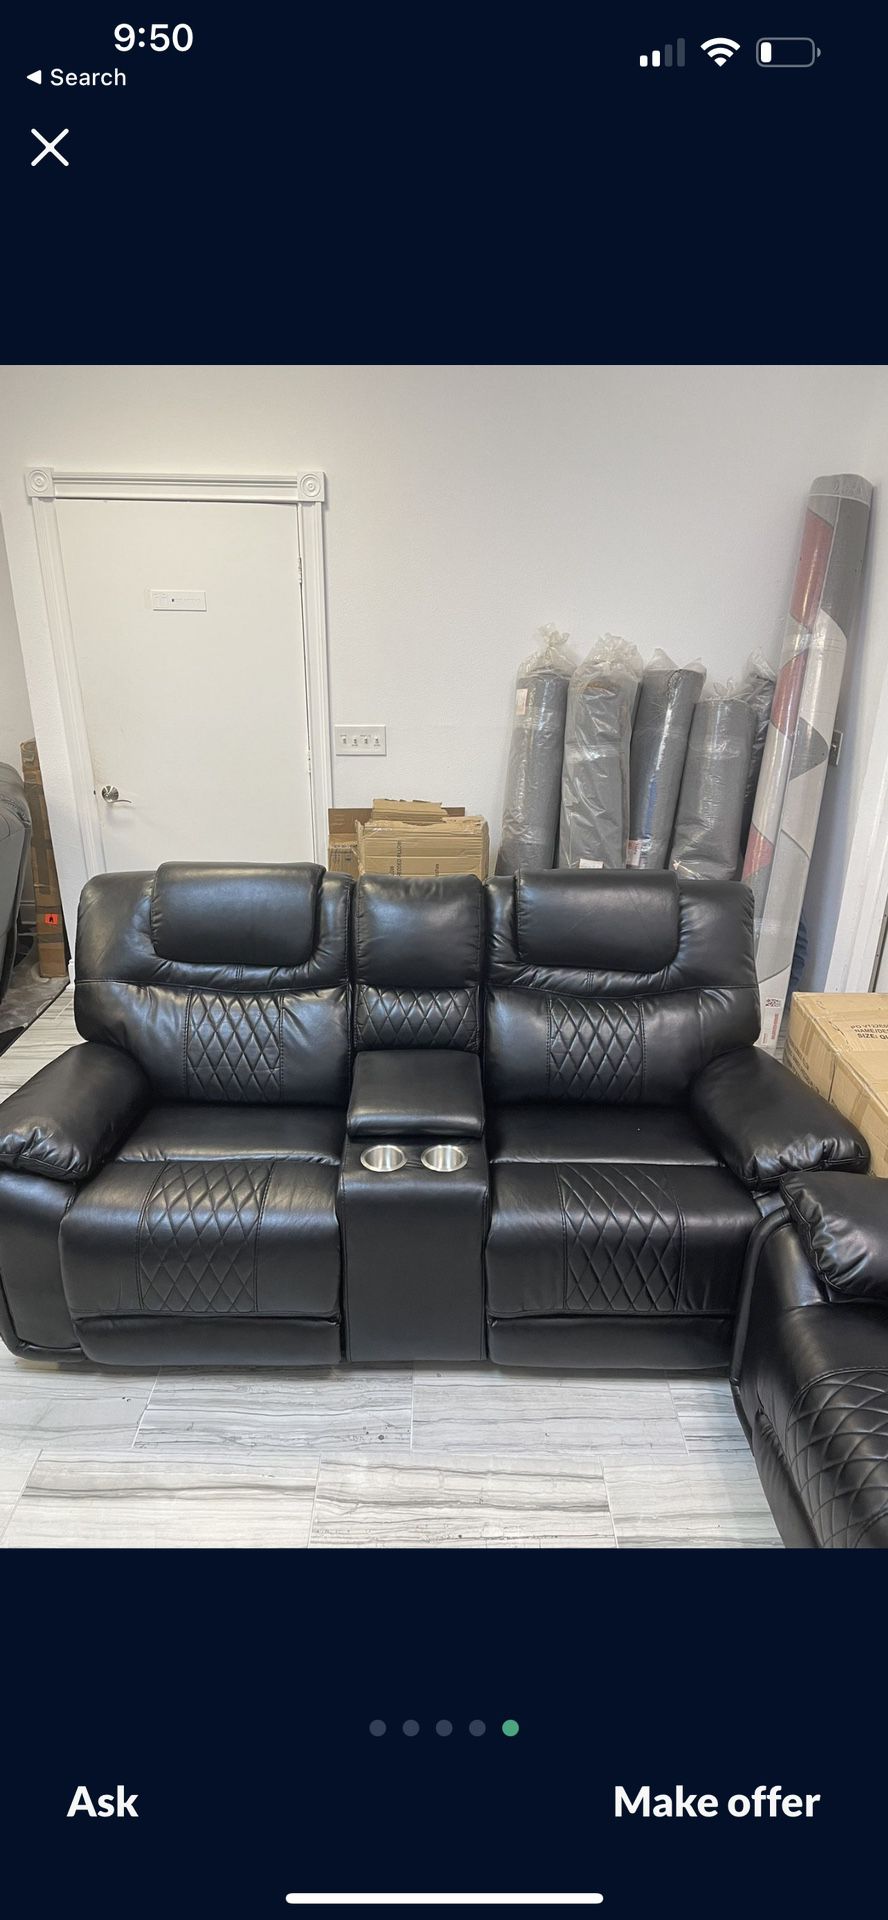 GORGEOUS BLACK SANTIAGO SOFA AND LOVESEAT!$999!*SAME DAY DELIVERY*NO CREDIT NEEDED*EASY FINANCING*HUGE SALE*